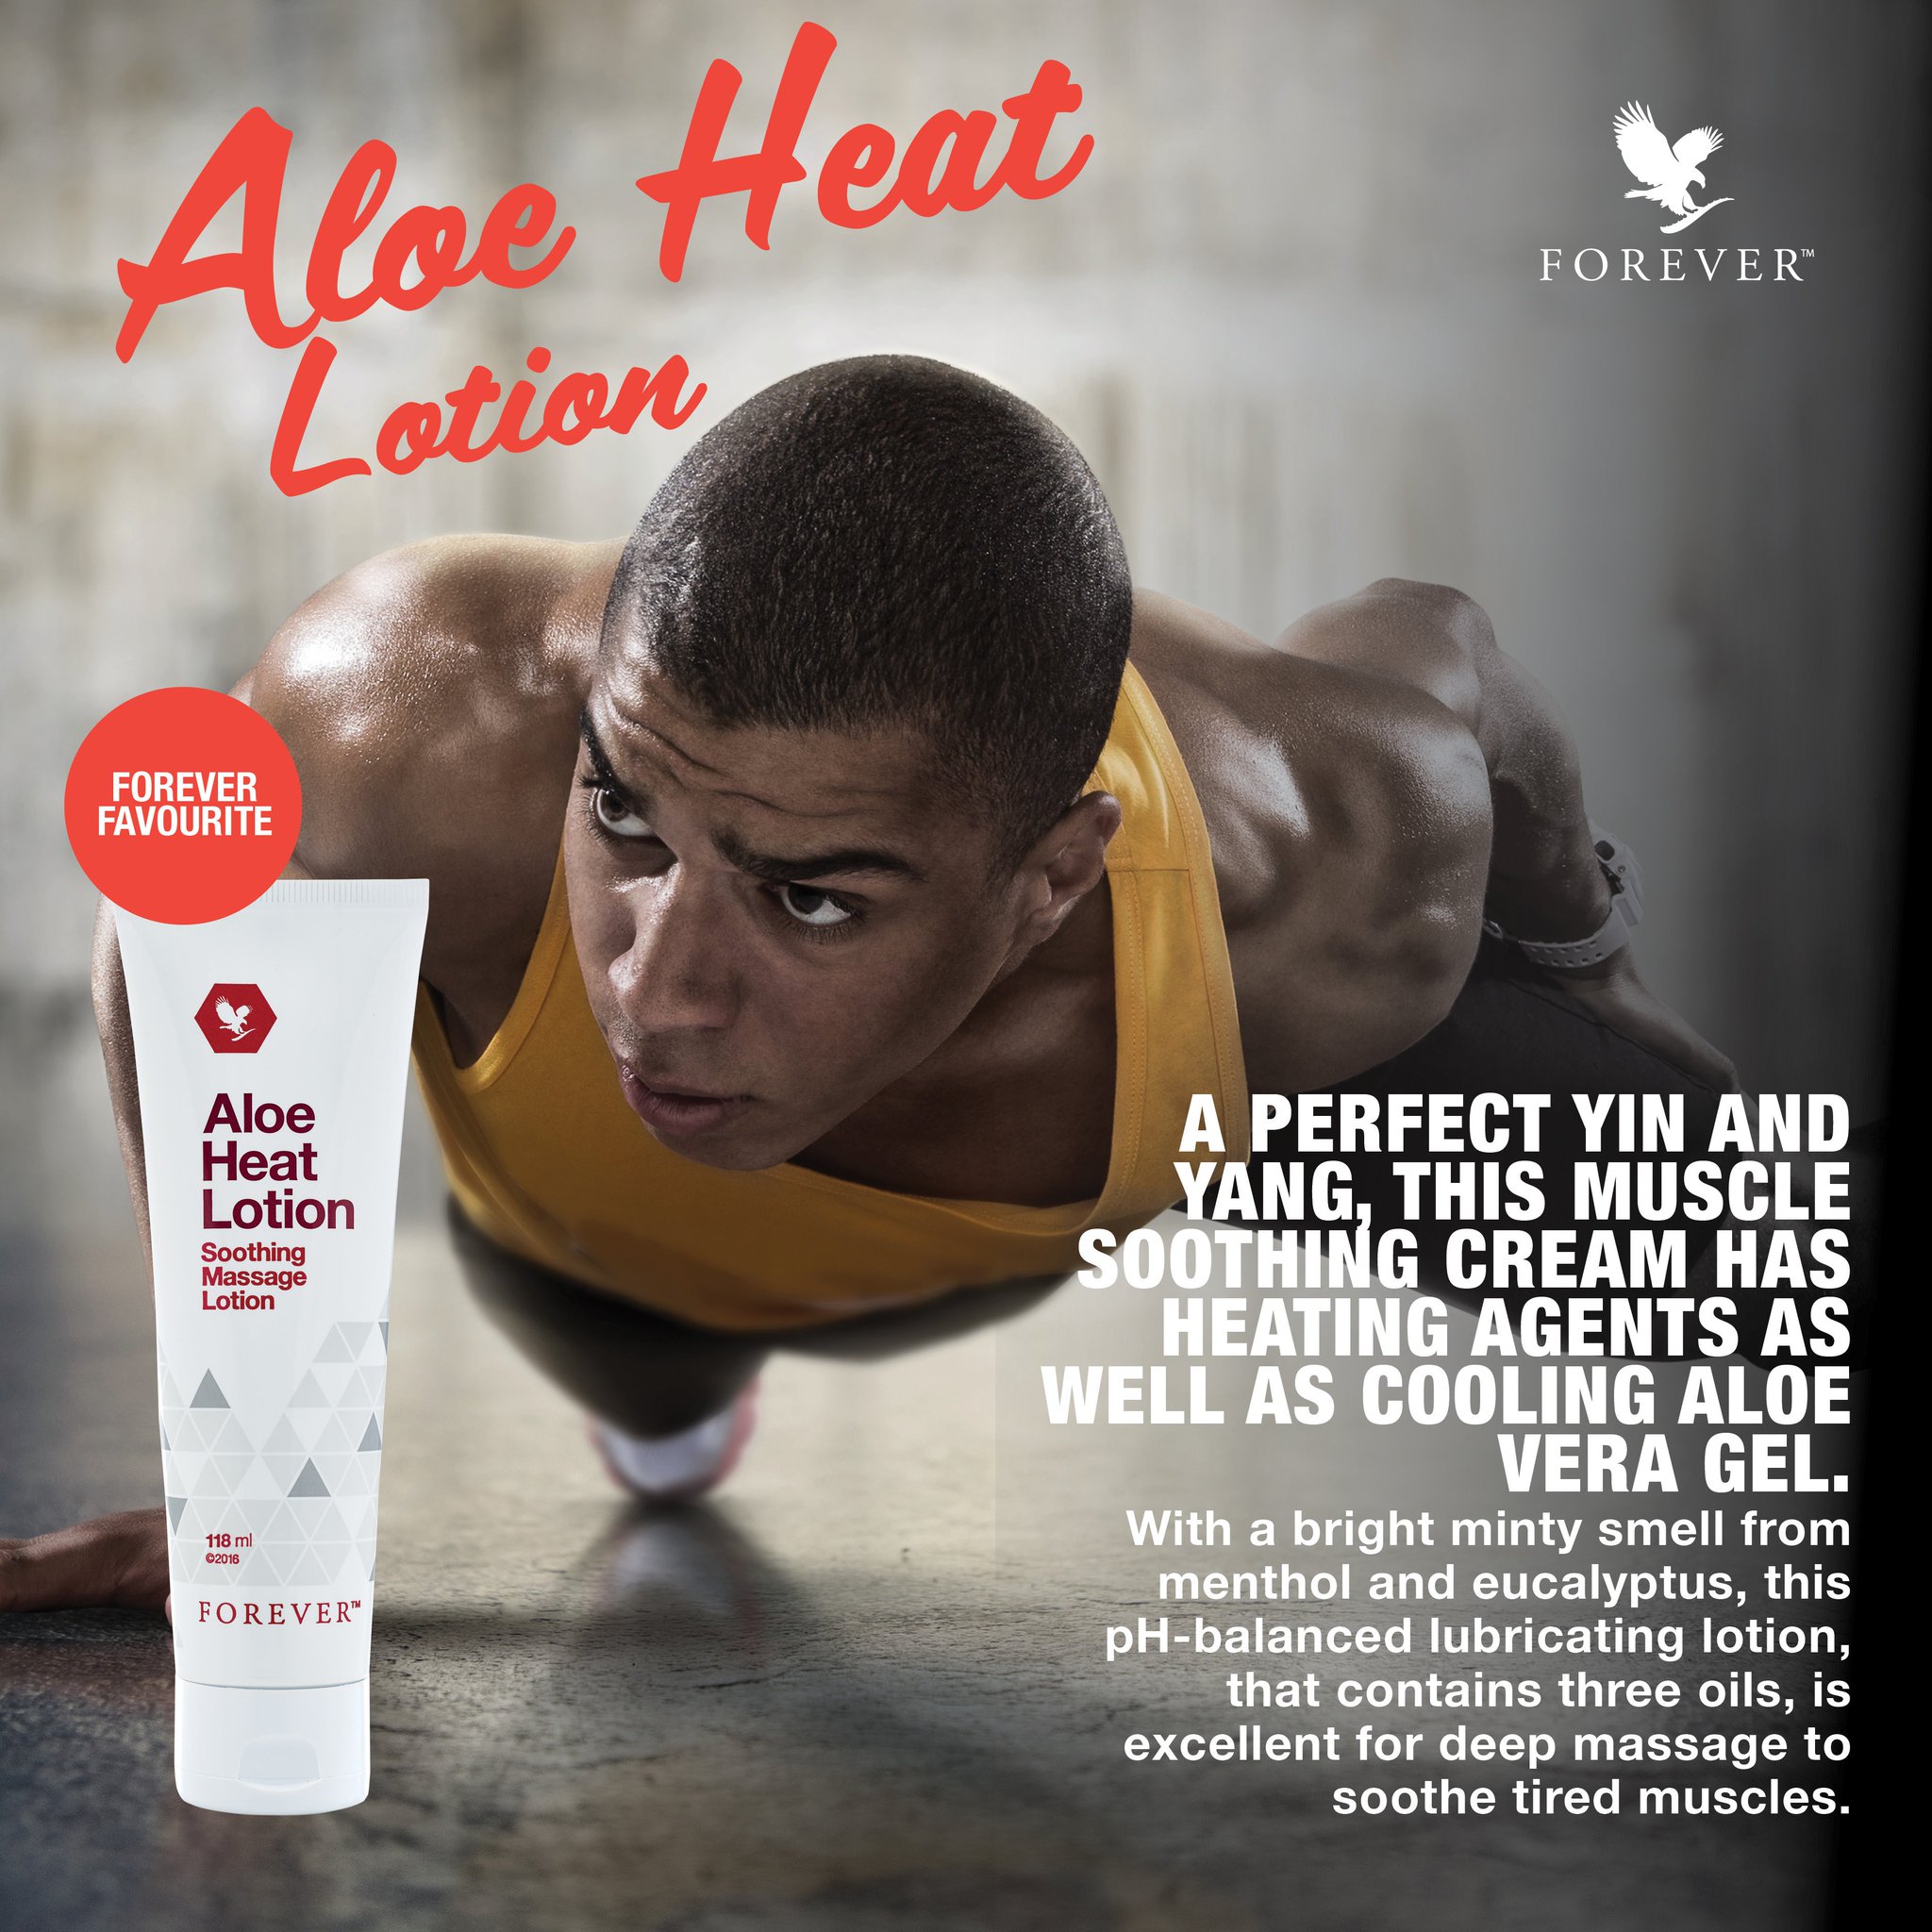 Forever Living Products Southern Africa sur : "Aloe Heat Lotion is an ideal sports rub. Rich, emollient formula containing deep heating to help soothe tired muscles. #TheAloeVeraCompany https://t.co/L22JIBb1Fo" / Twitter